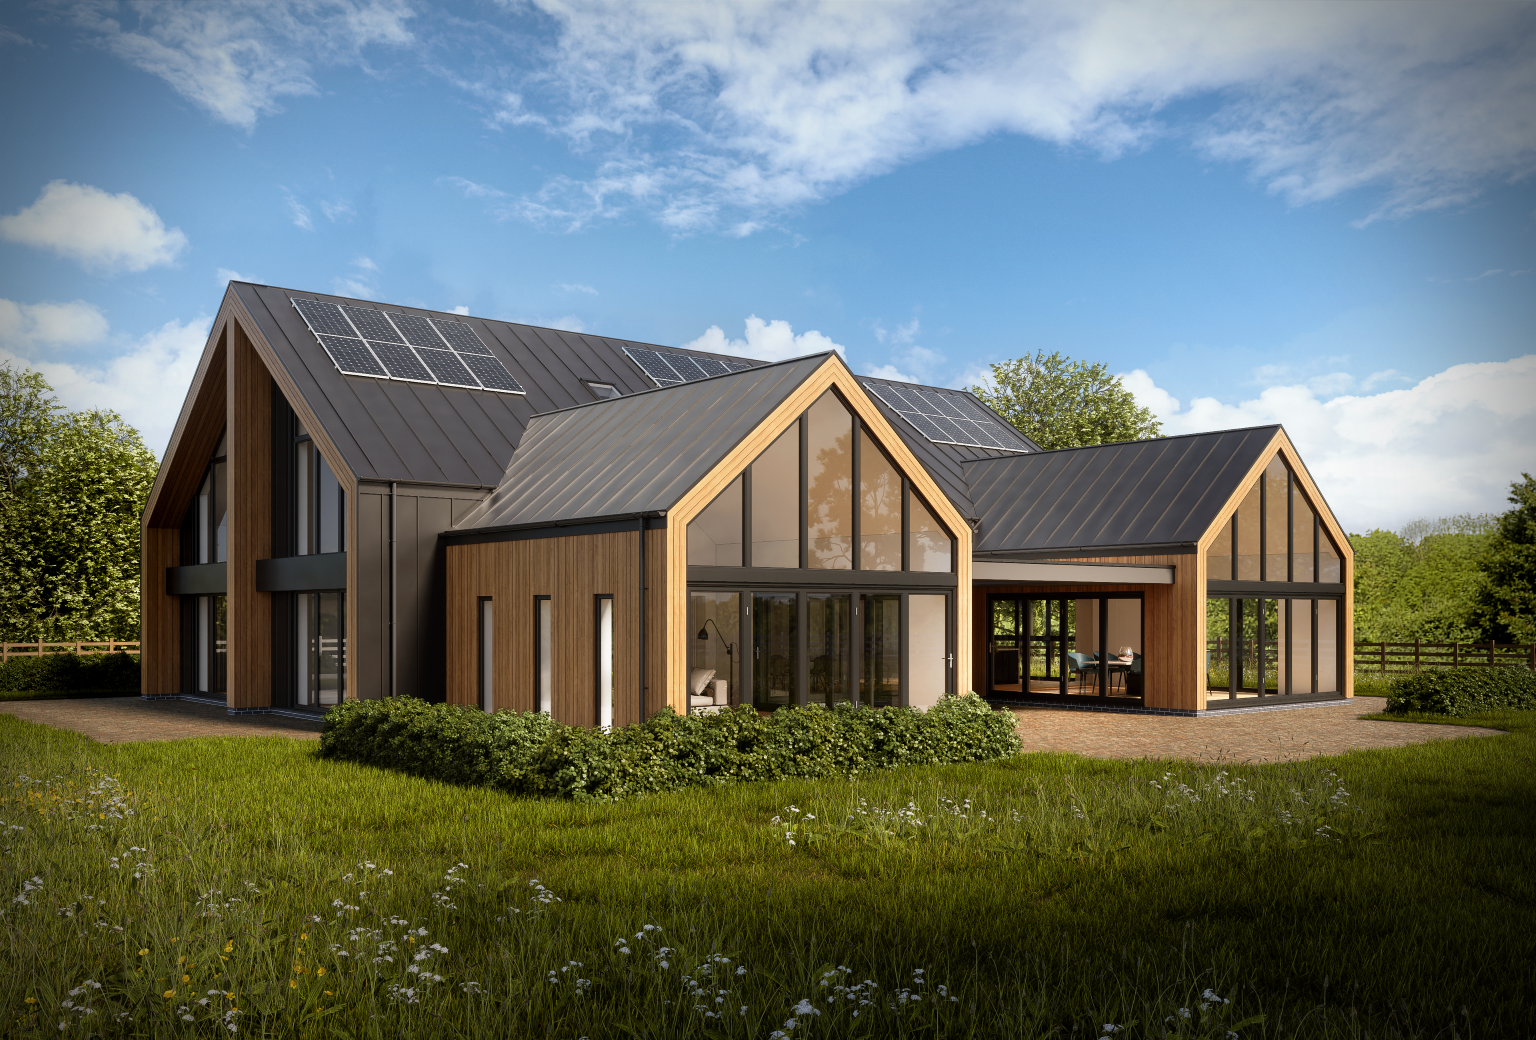 Barn Conversion Planning & Listed Building Consent Specialists in Lincolnshire and across the UK